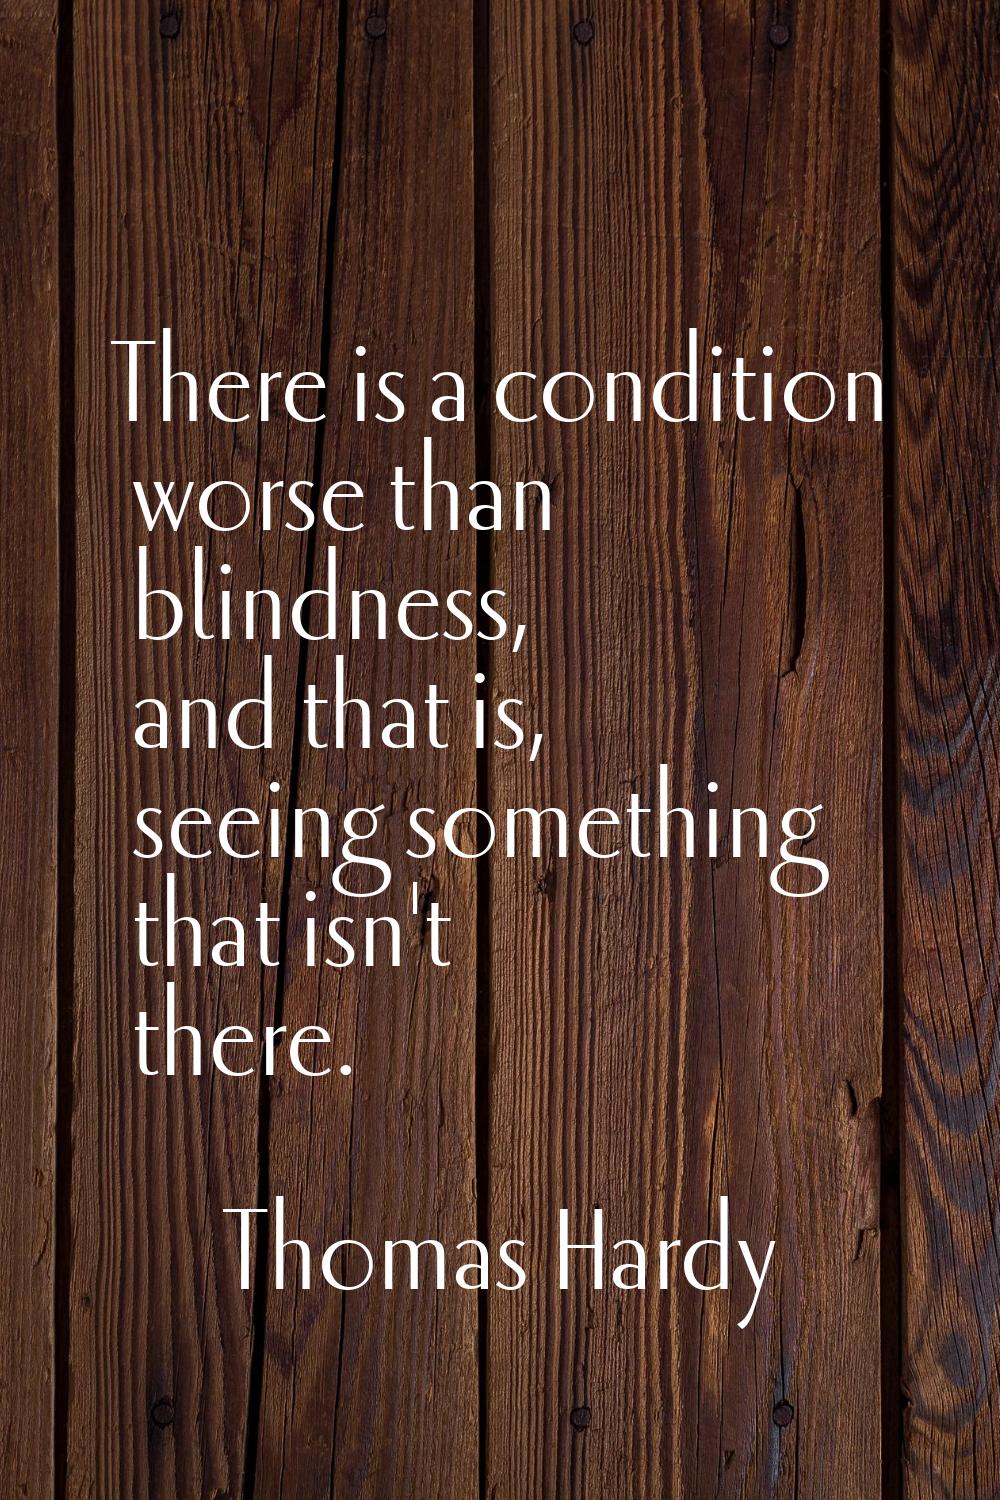 There is a condition worse than blindness, and that is, seeing something that isn't there.